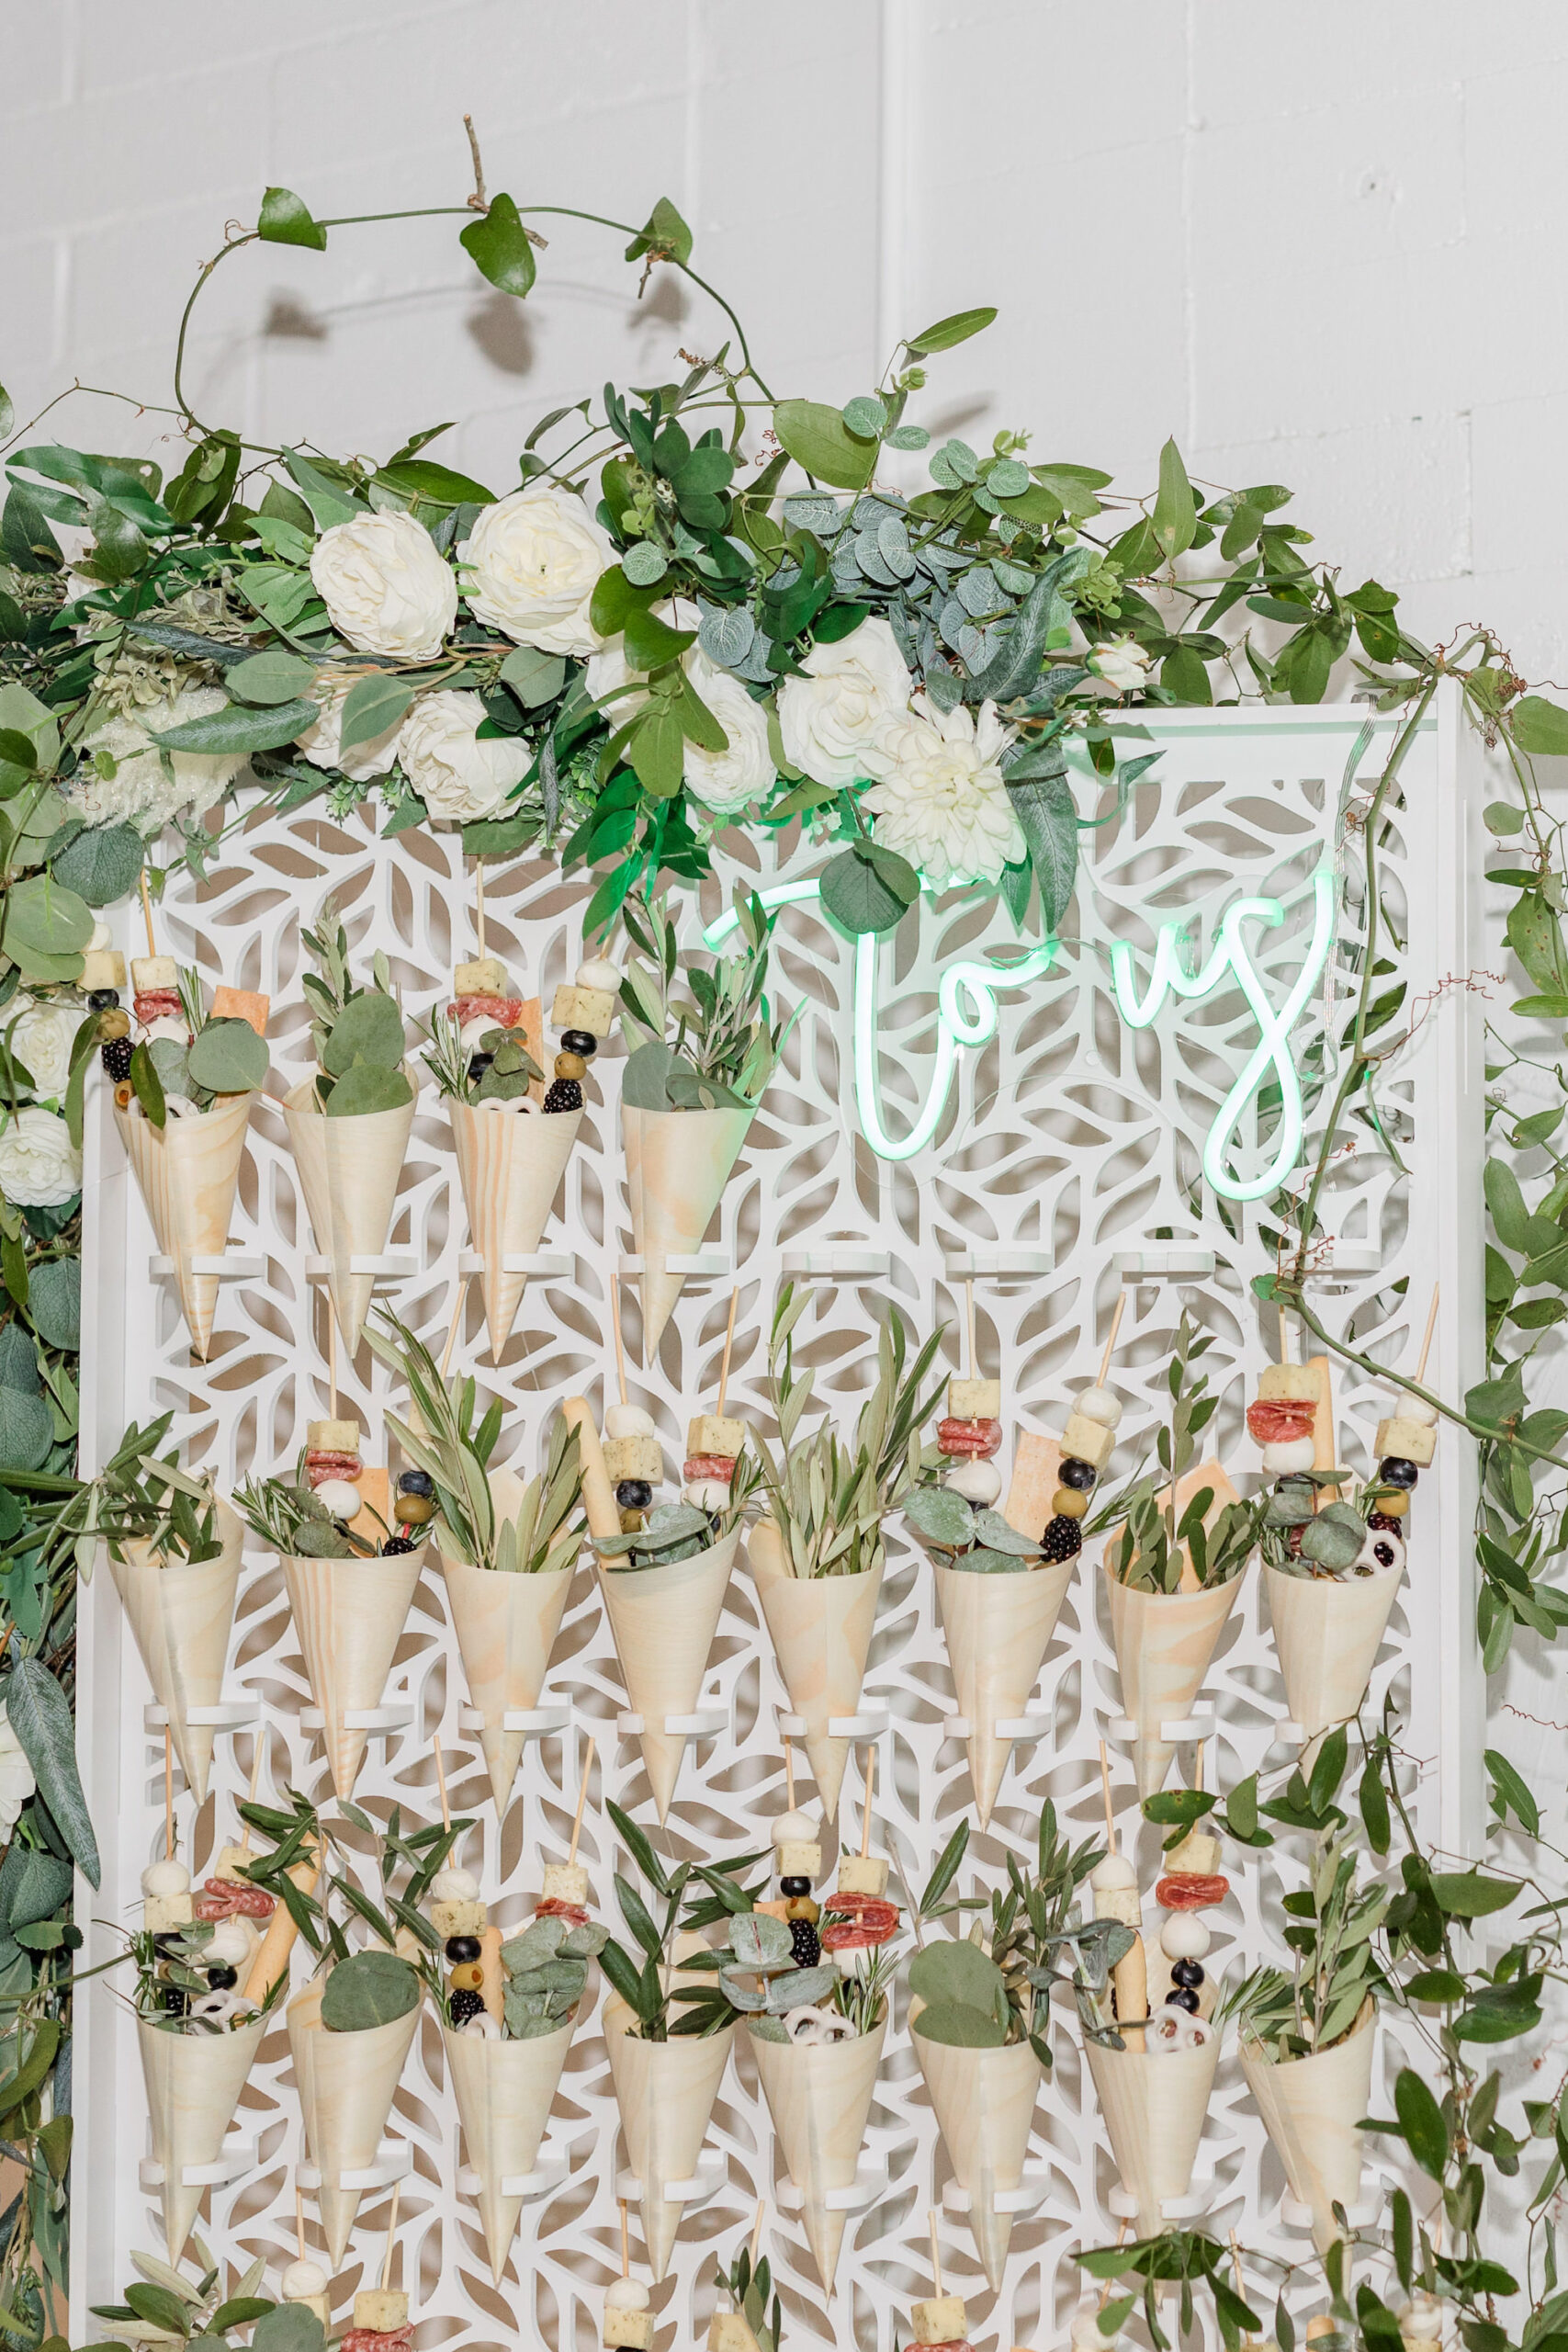 Winter Modern Whimsical Wedding Reception Decor, Unique Charcuterie Cones on Wall with Green Neon Sign, White Roses and Greenery Garland | Tampa Bay Wedding Planner MDP Wedding Events